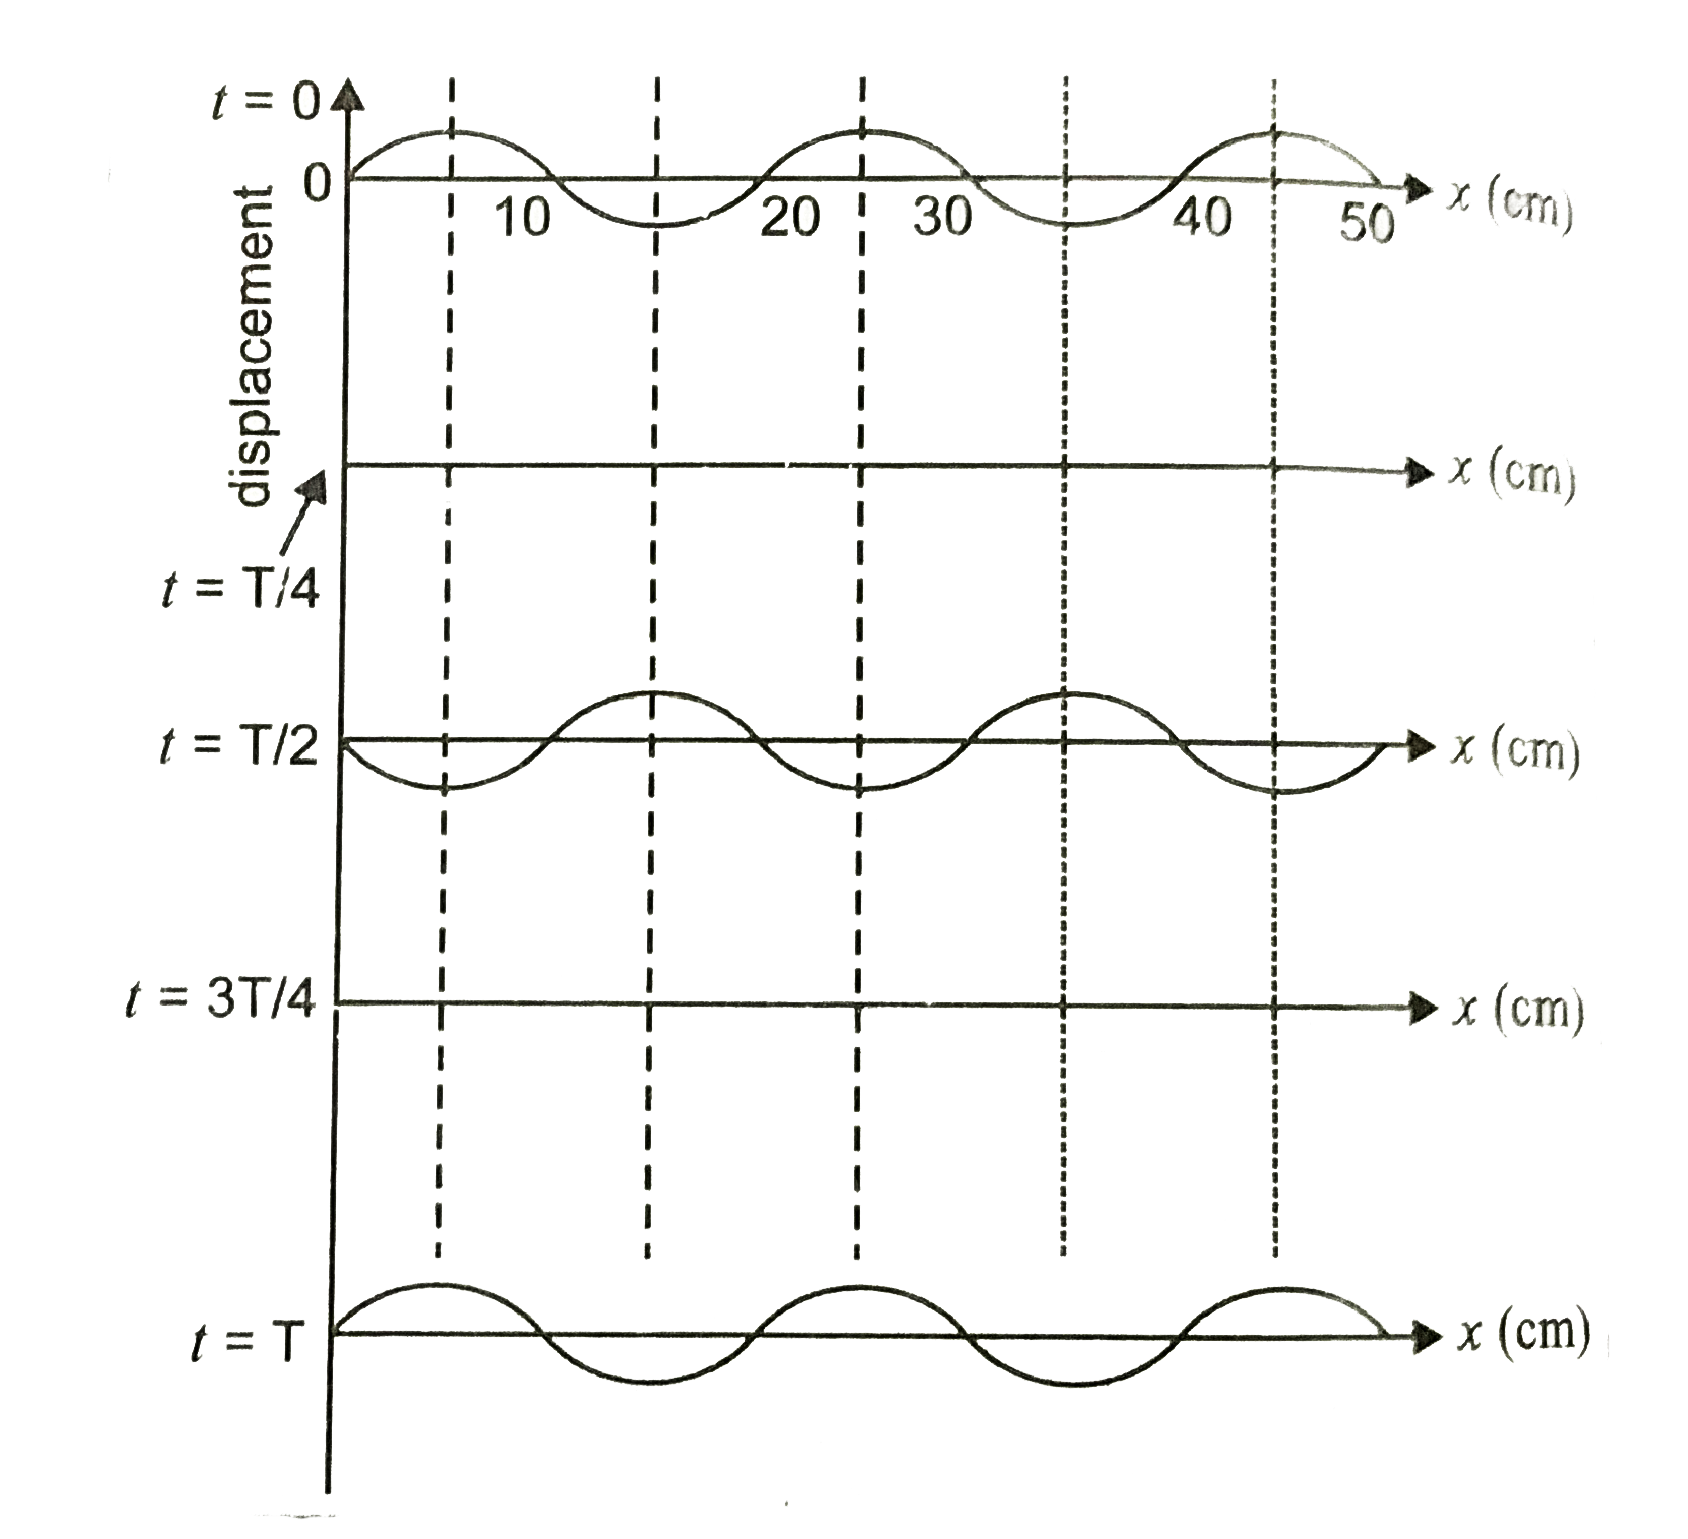 The wave pattern on a stretched string is shown in figure. Interpret what kind of wave this is and find its wavelength.